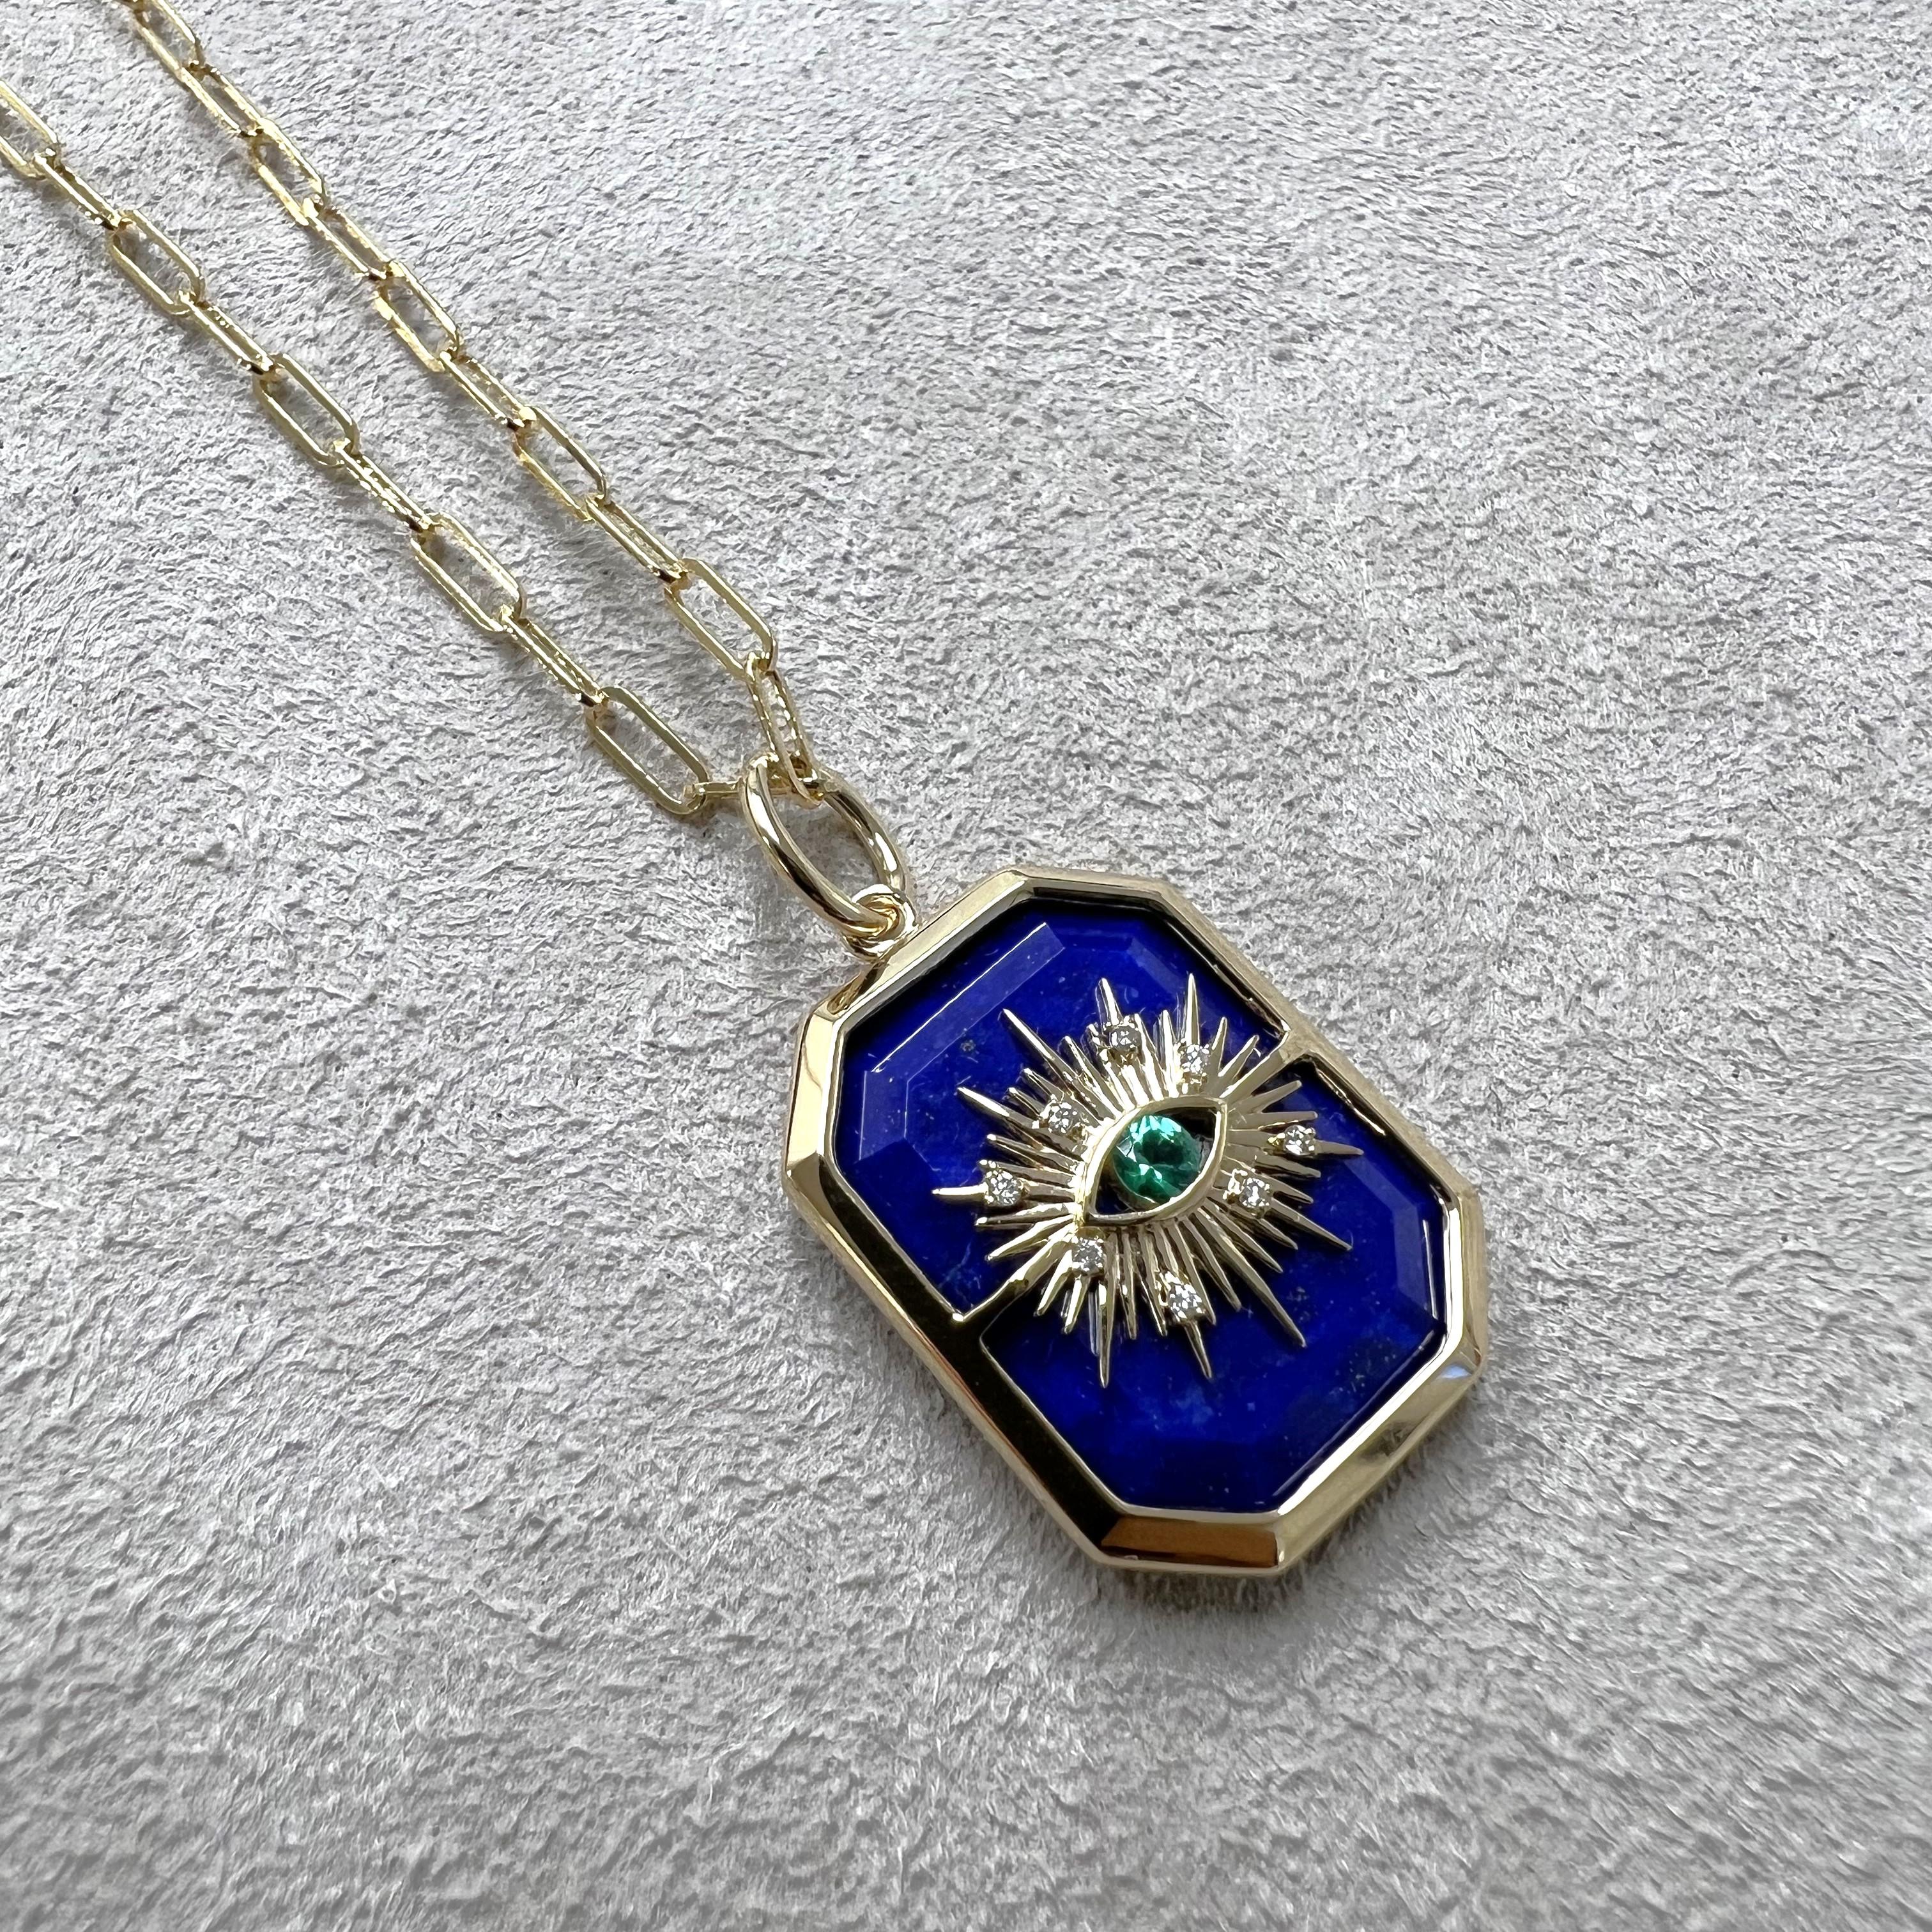 Created in 18 karat yellow gold
Lapis Lazuli 13 carats approx.
Emerald 0.07 carat approx.
Diamonds 0.03 carat approx.
Chain sold separately
Limited Edition

Crafted from 18 karat yellow gold, this luxurious limited-edition pendant features an